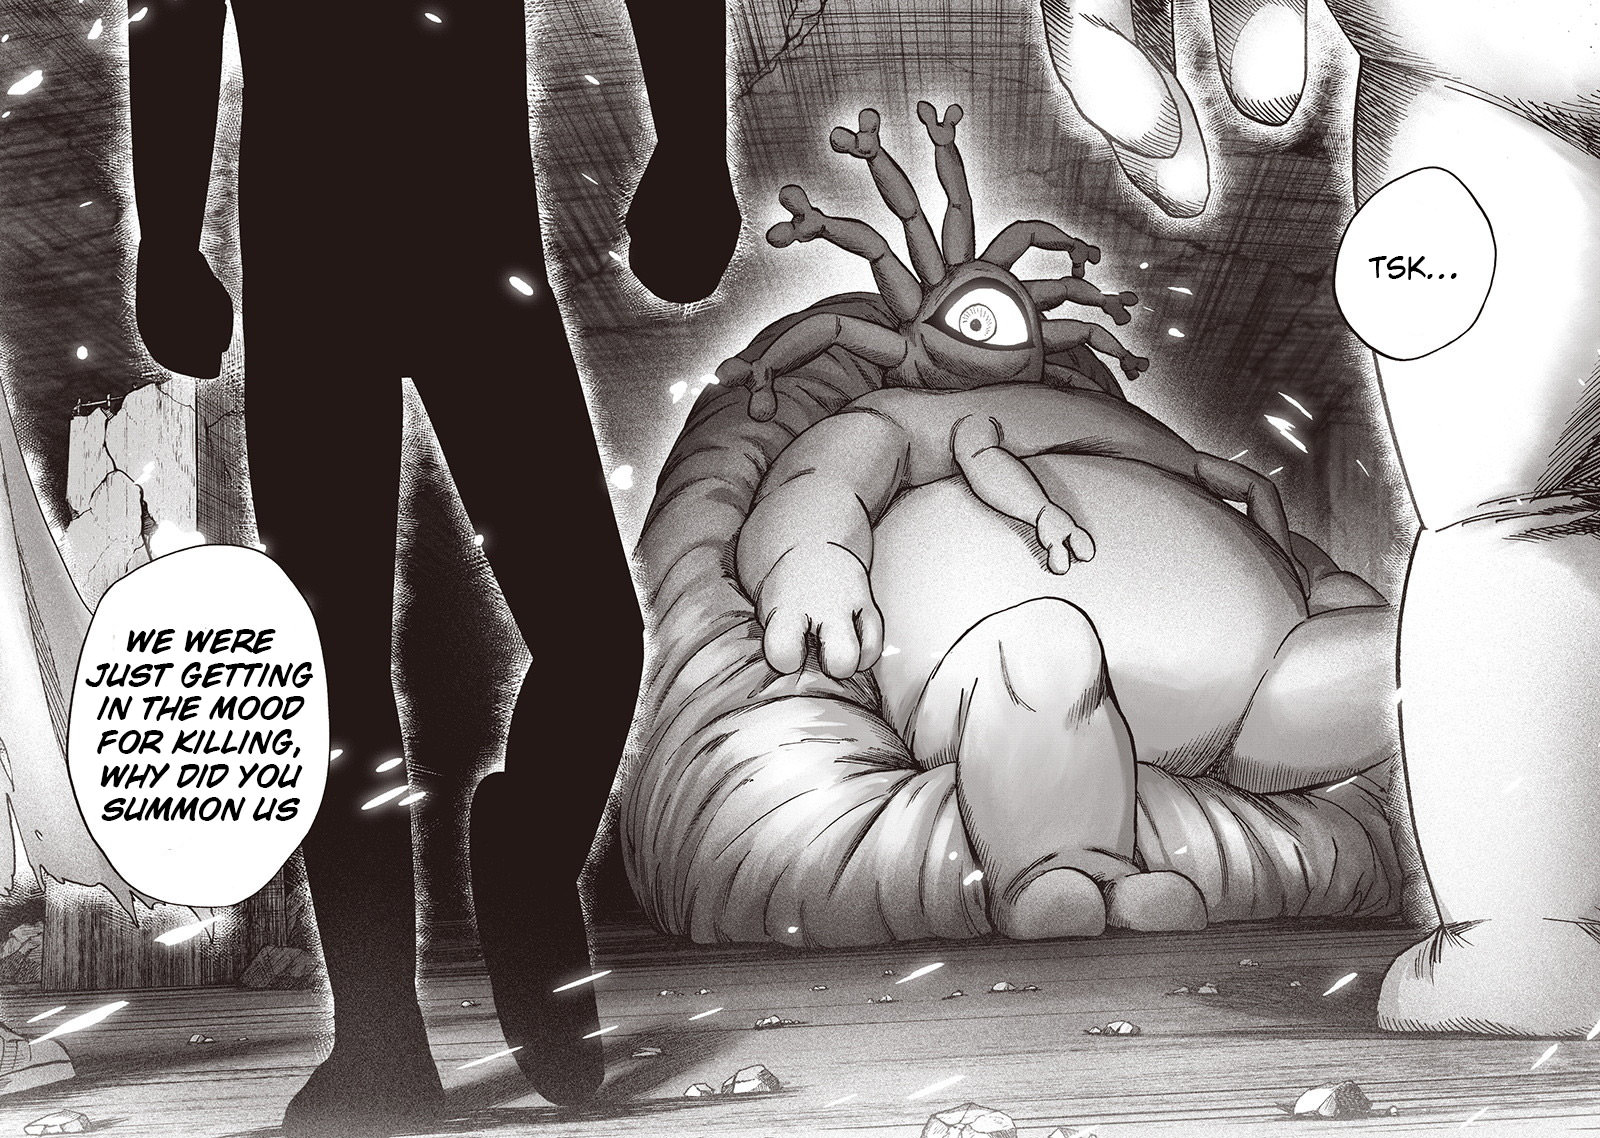 One Punch Man, Chapter 94 I See image 141